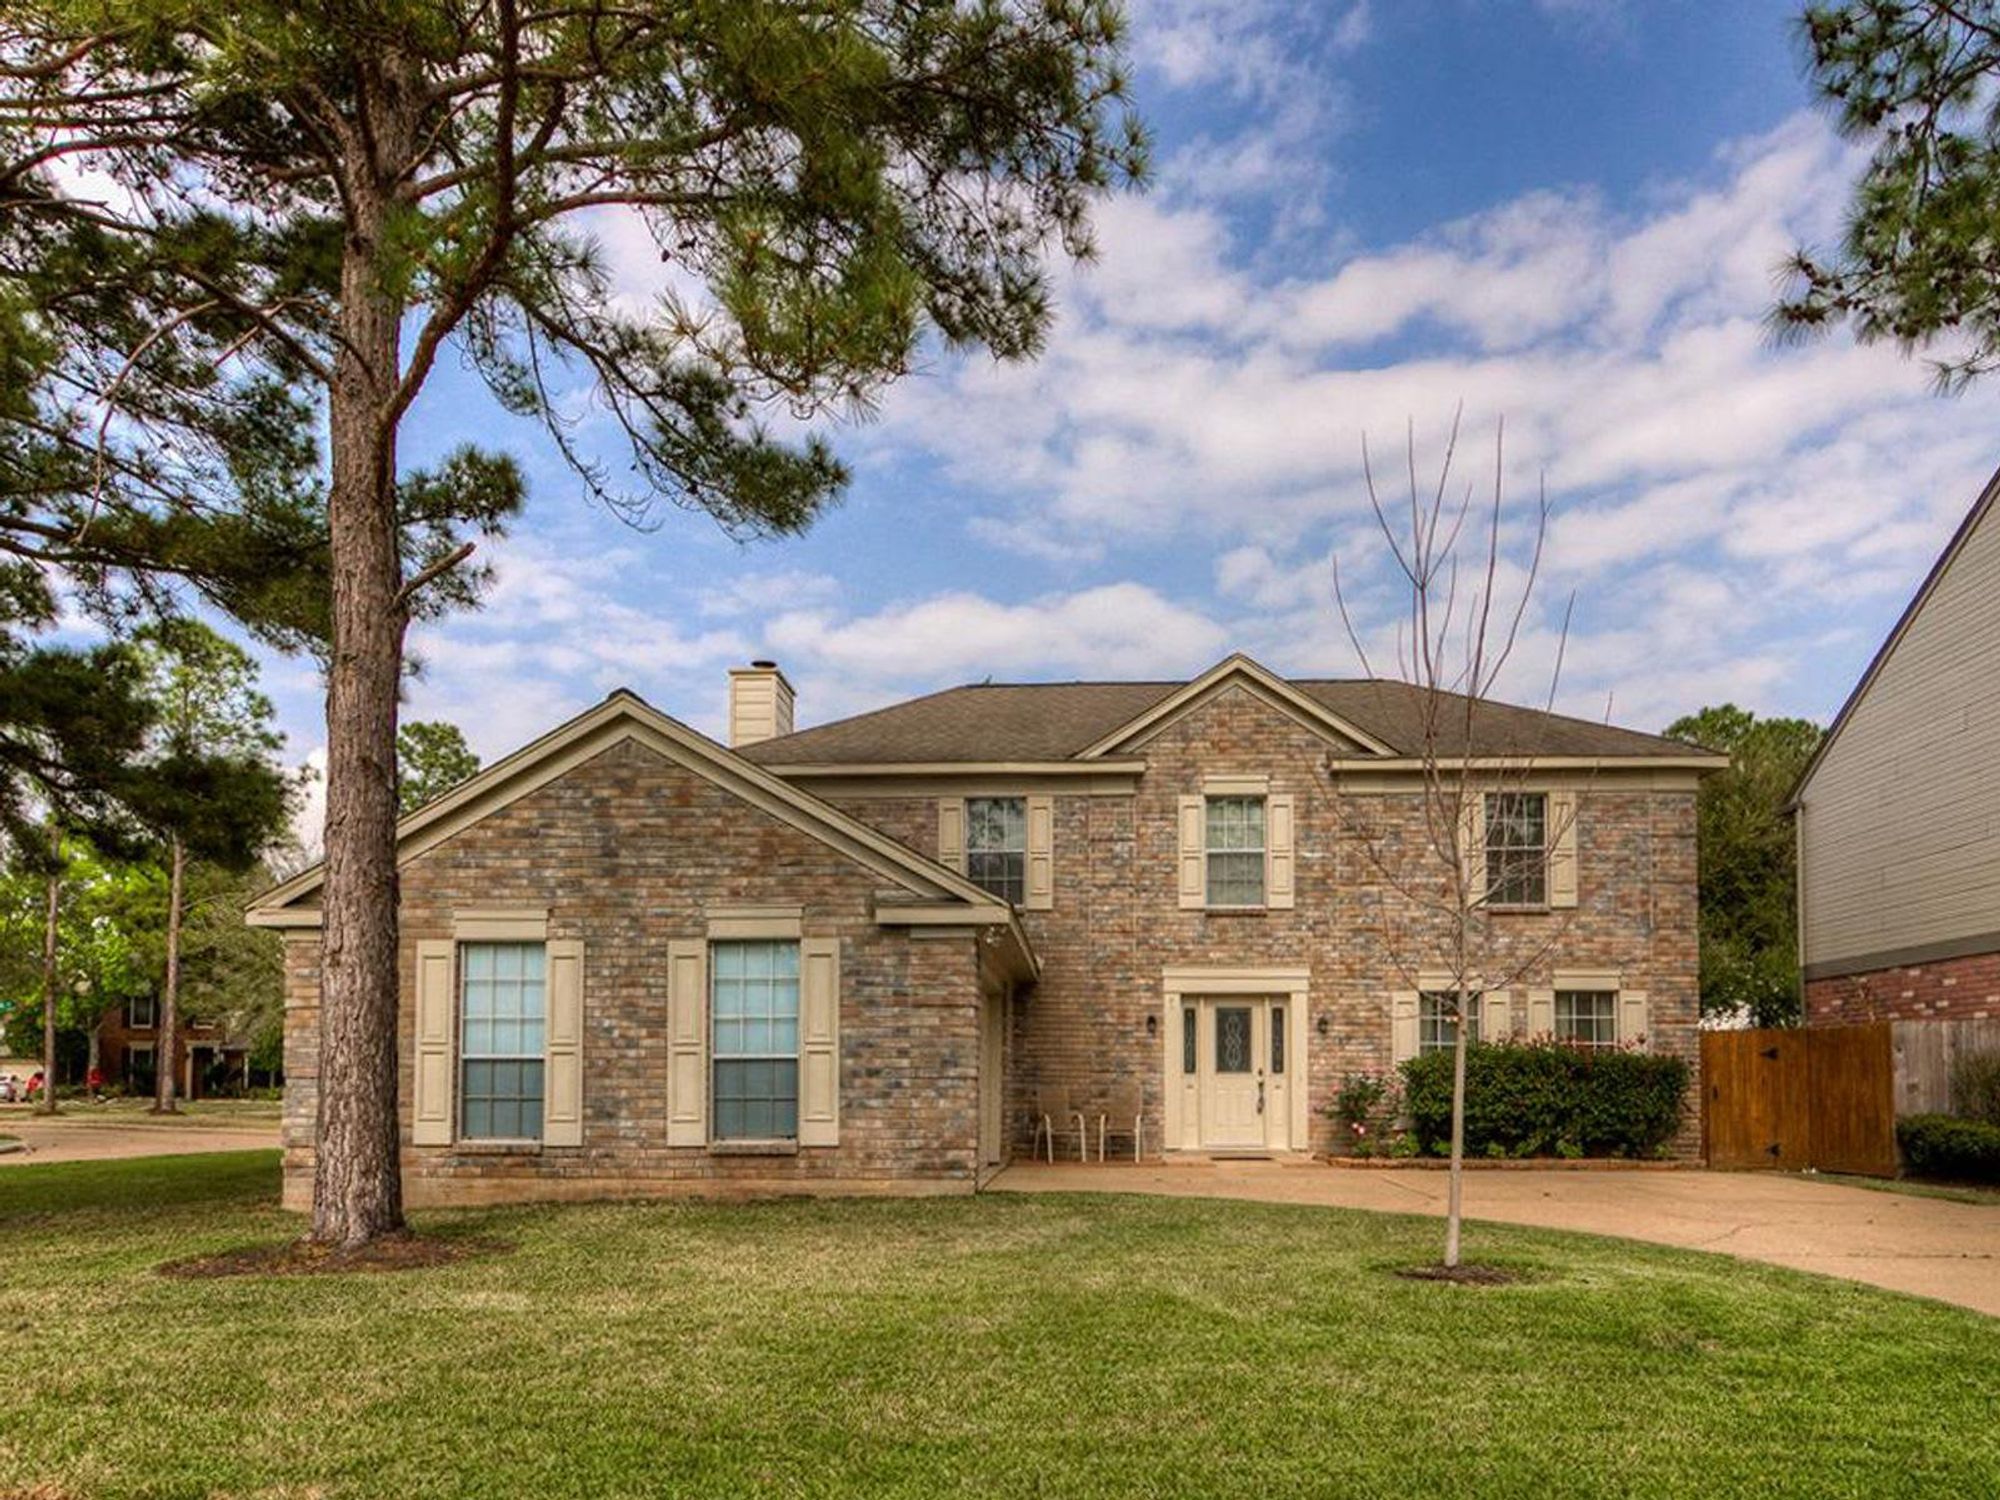 median home in Houston house front with pine trees and lawn